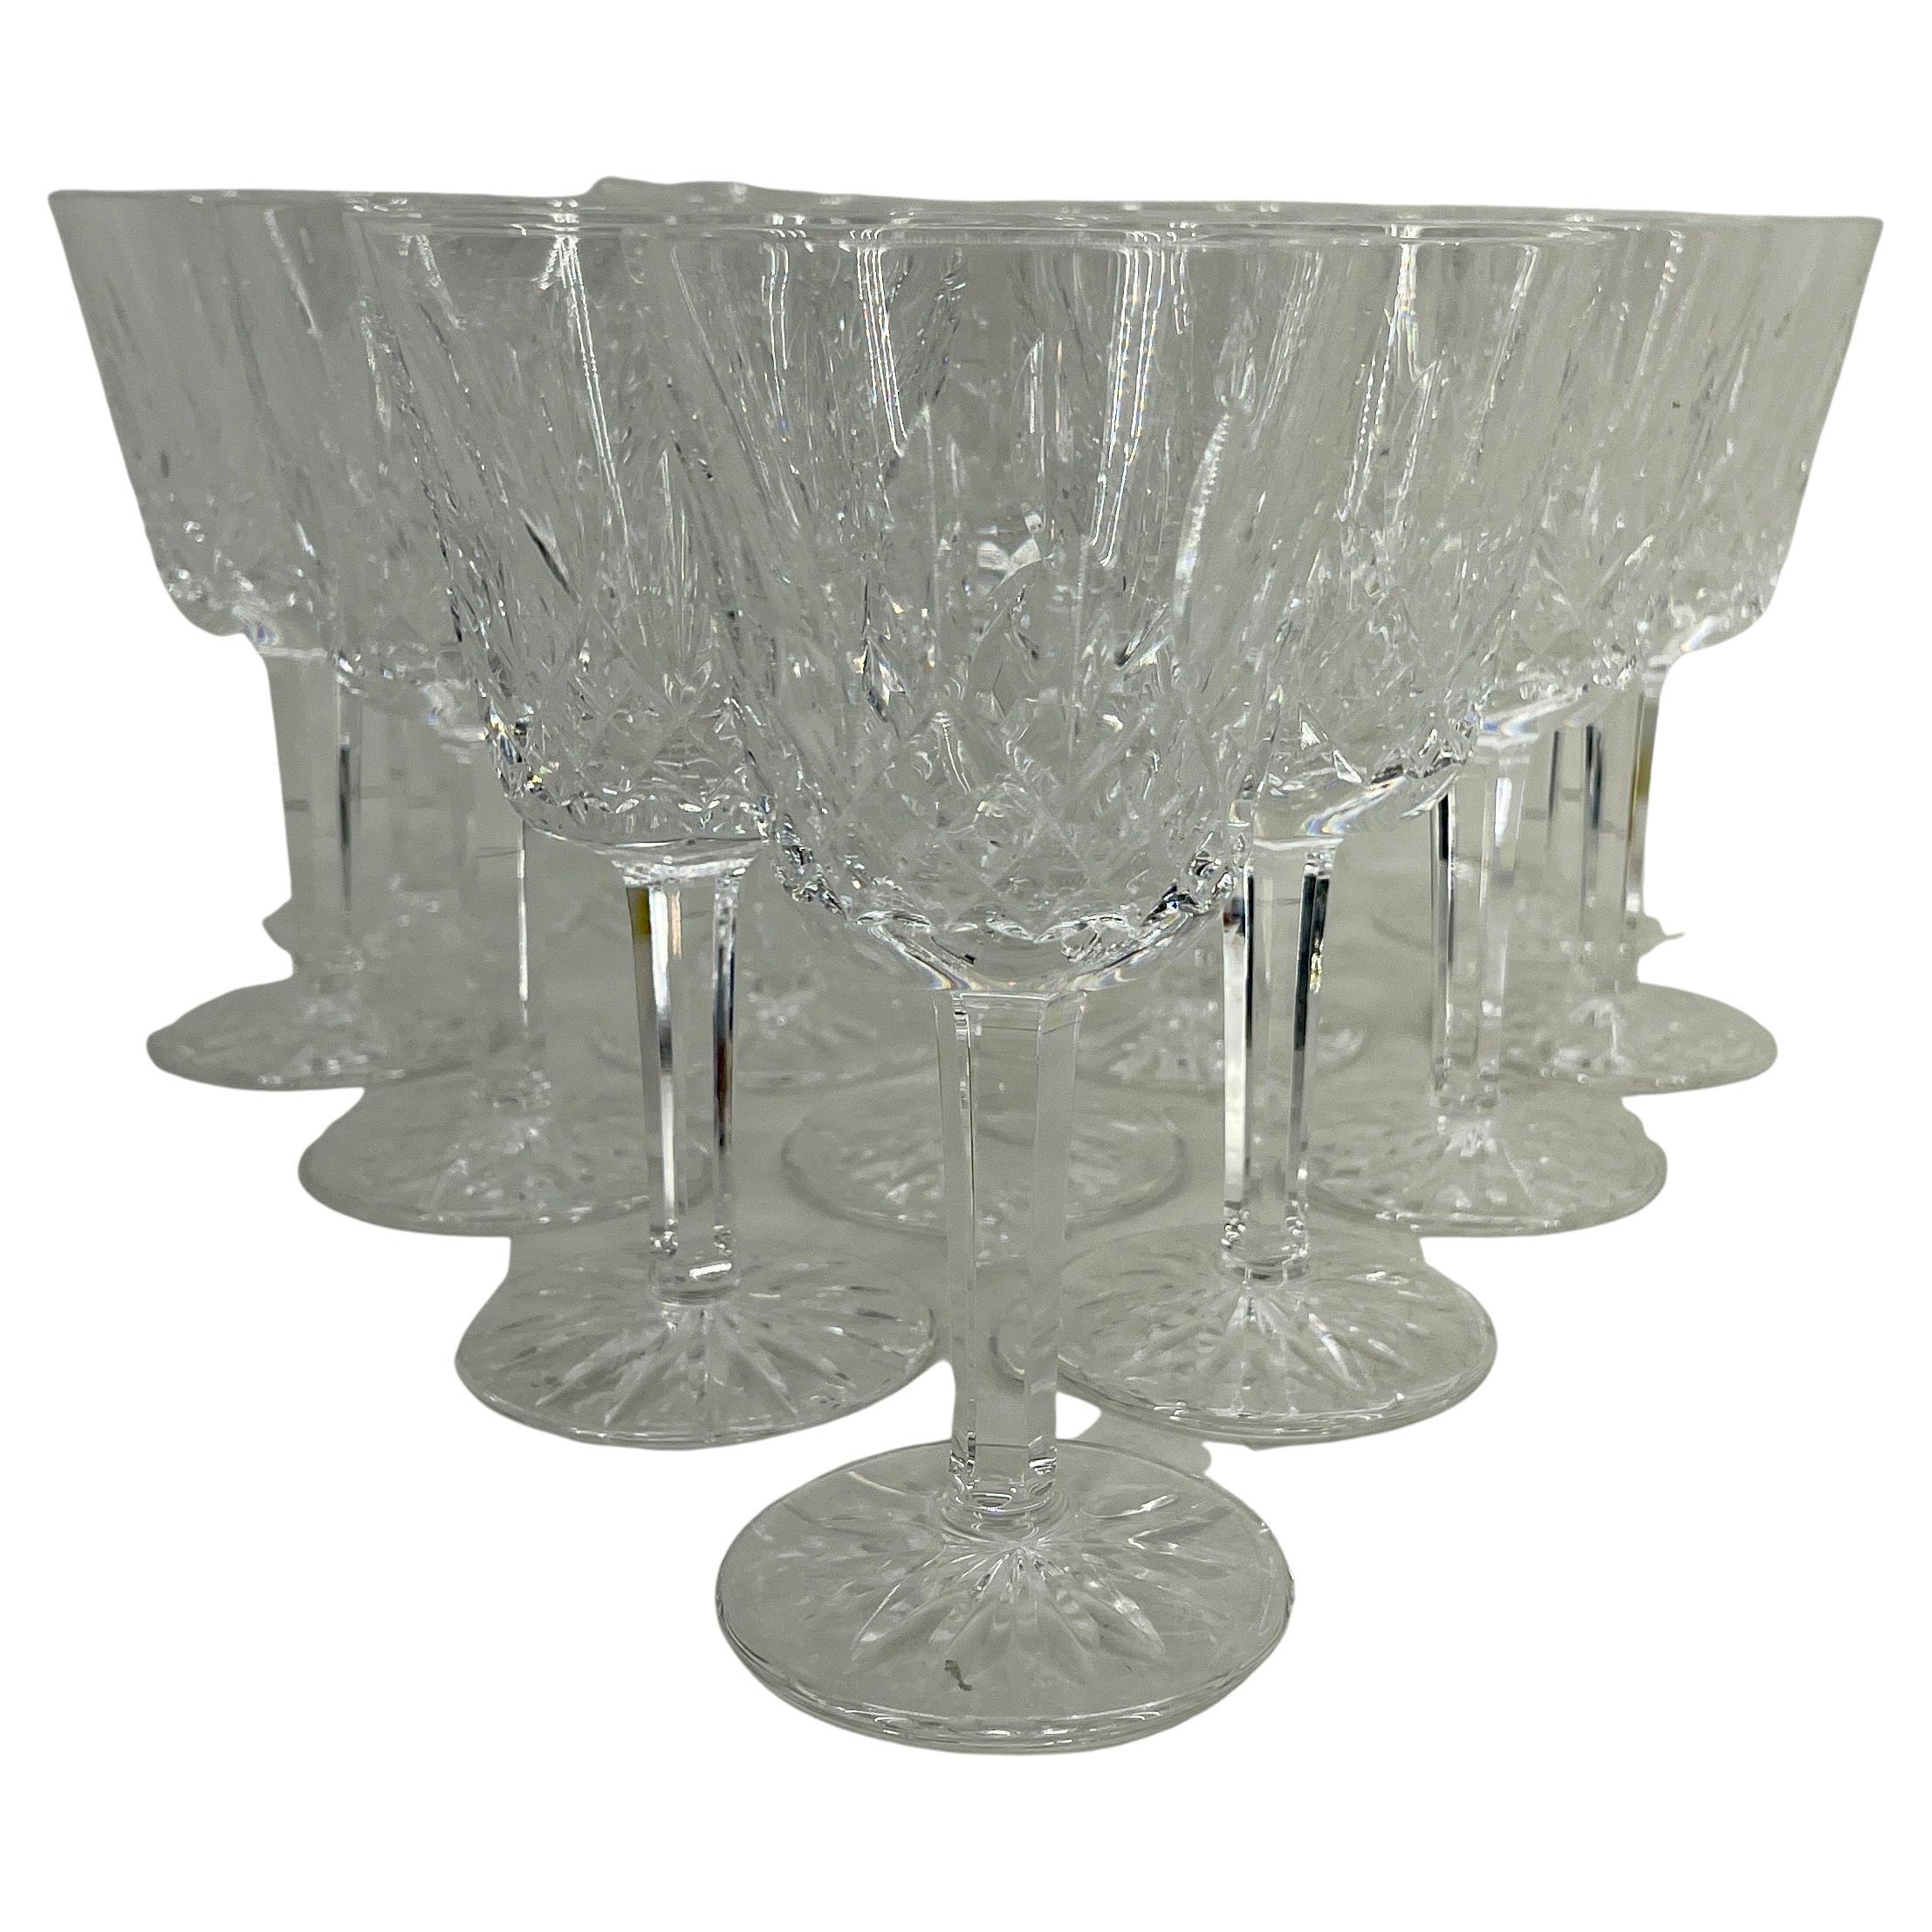 Vintage Lismore Waterford Crystal Wine Glasses, set of 14

The famous Lismore pattern was created in 1952 by Miroslav Havel, Waterford’s Chief of Design who drew inspiration for the pattern’s signature diamond and wedge cuts from the rugged charm